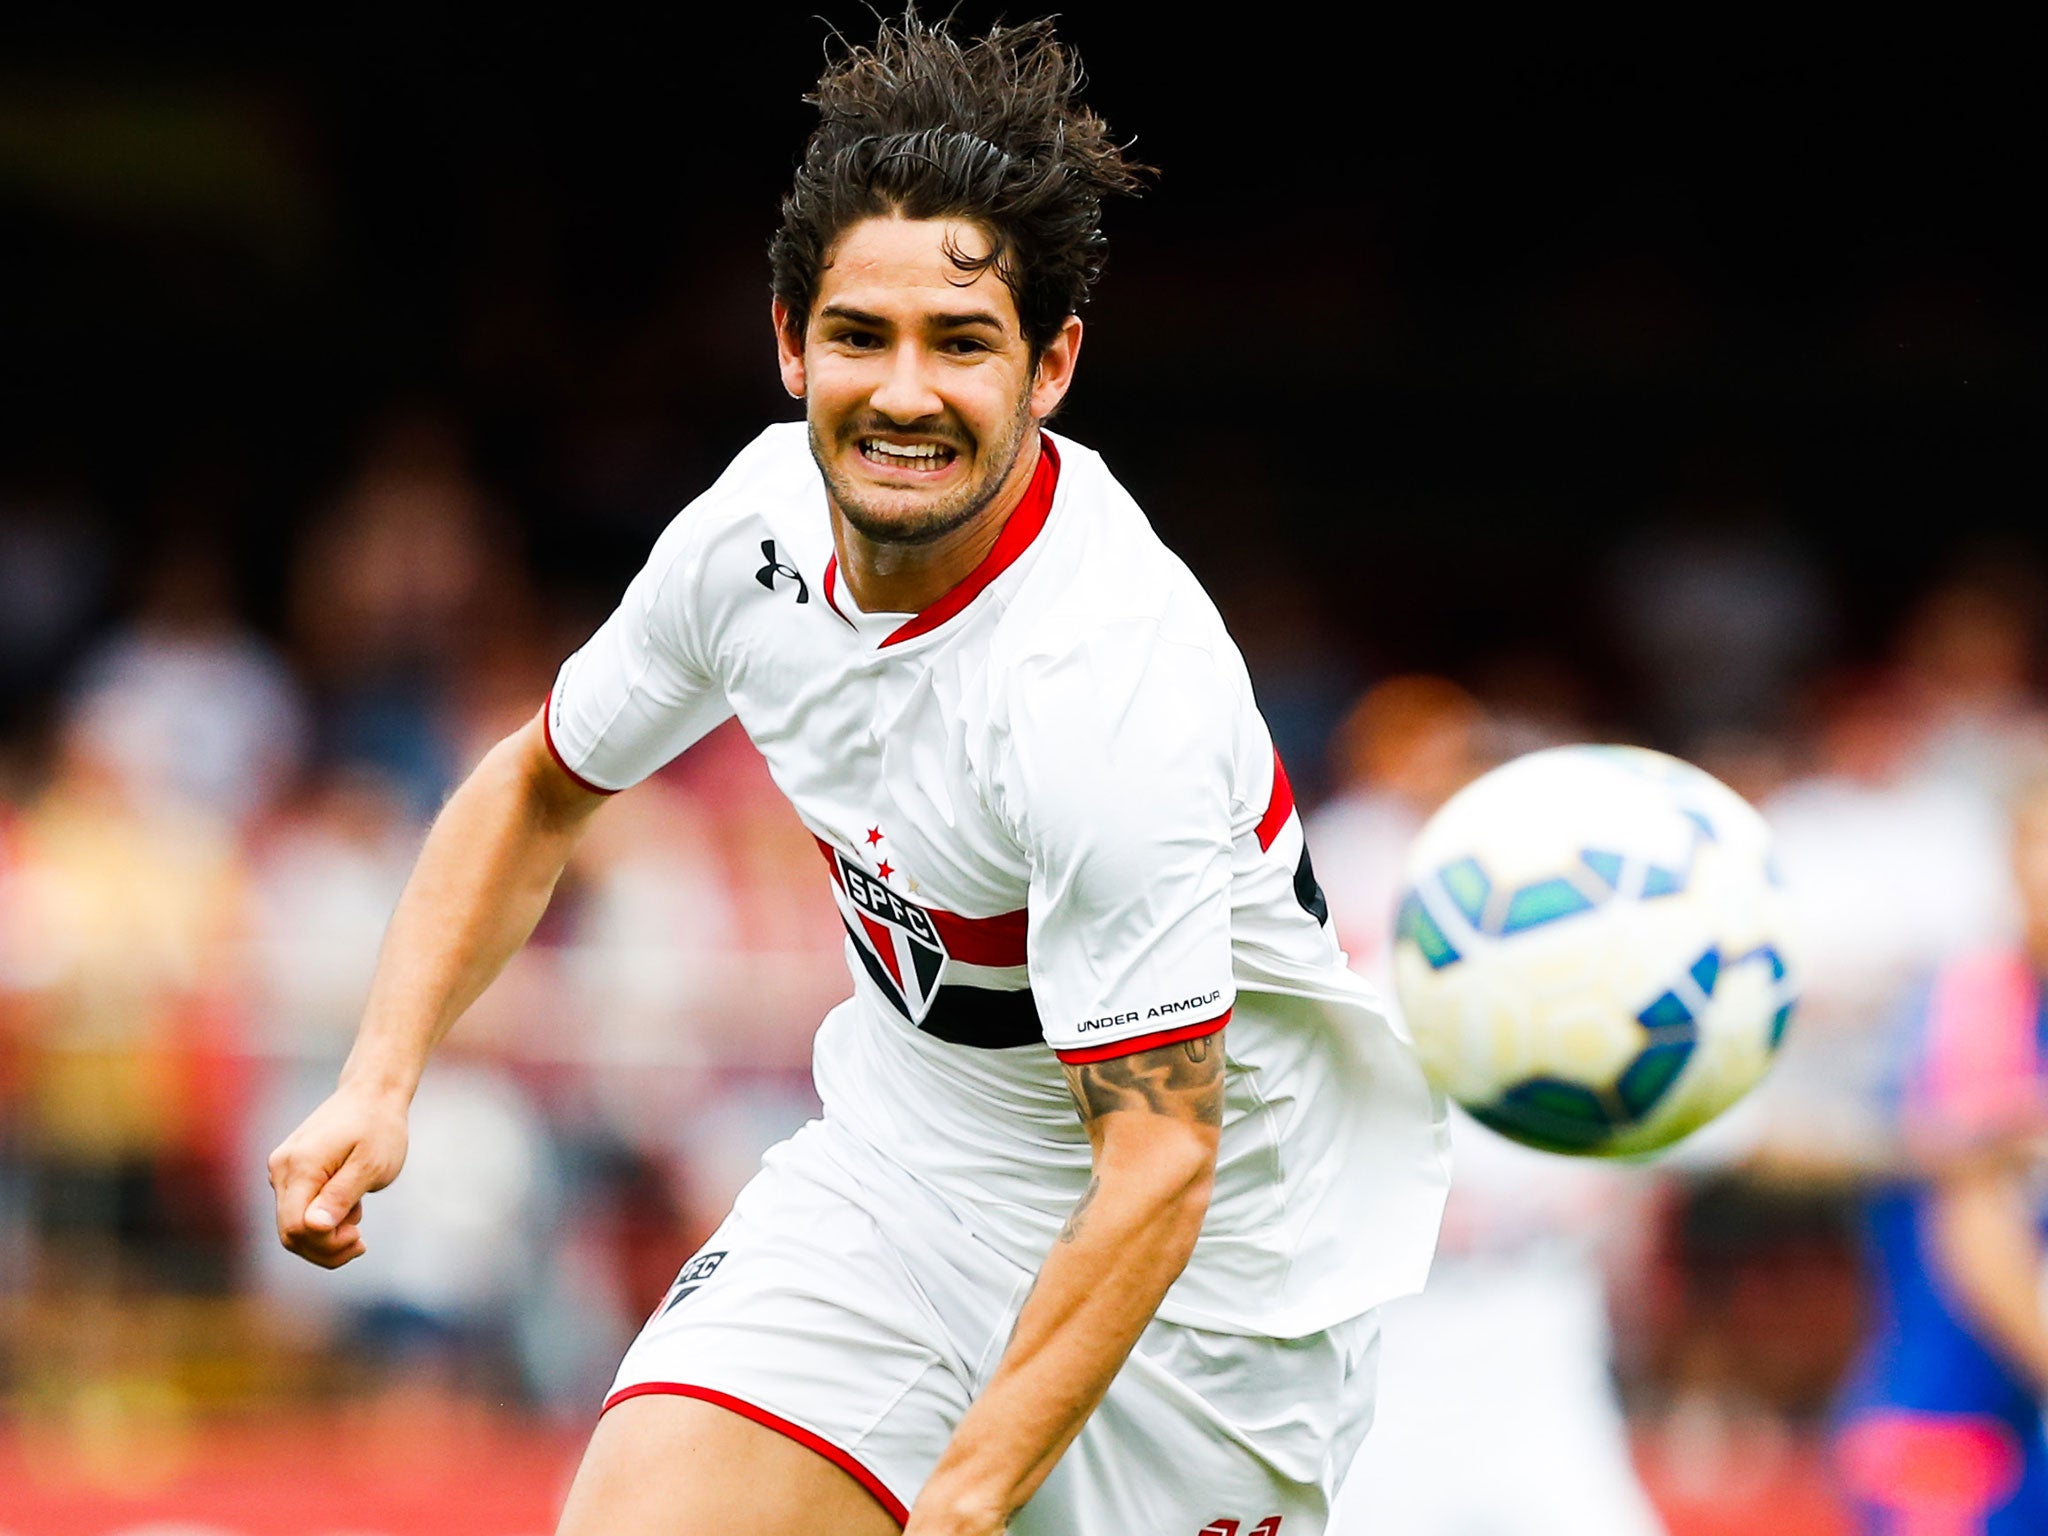 Alexandre Pato could make a move to the Premier League